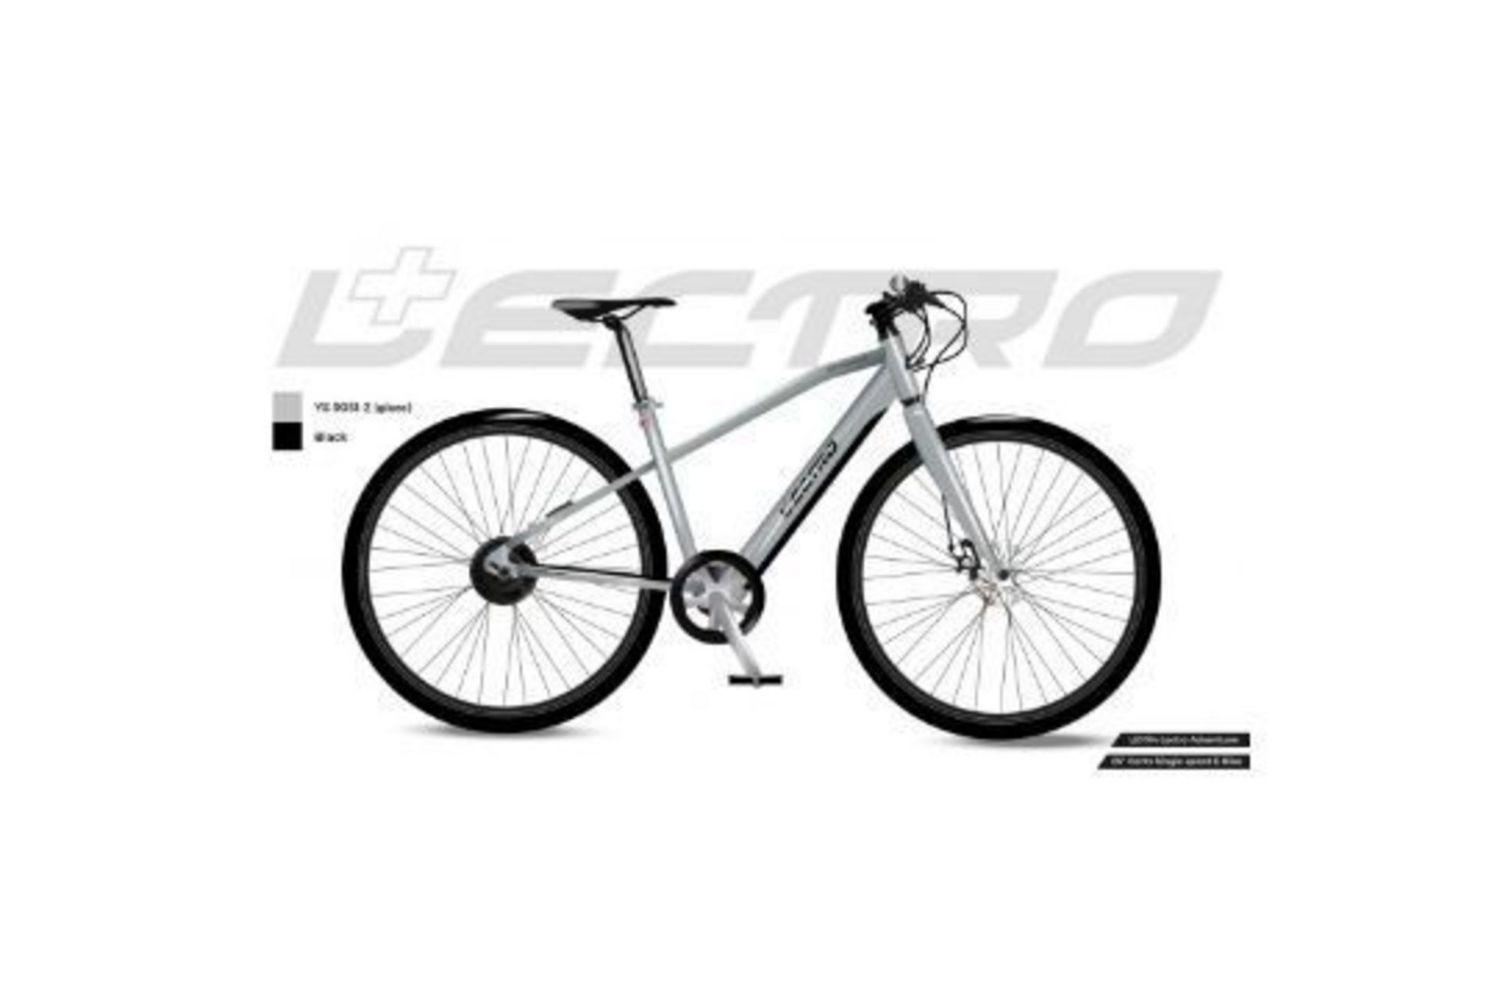 TRADE PALLET SALE TO INCLUDE ELECTRIC BIKES, LUGGAGE, GARDEN, TOOLS, GADGETS, ELECTRONICS, CLOTHING, DIY GOODS, AUTOMOTIVE  STOCK AND MORE